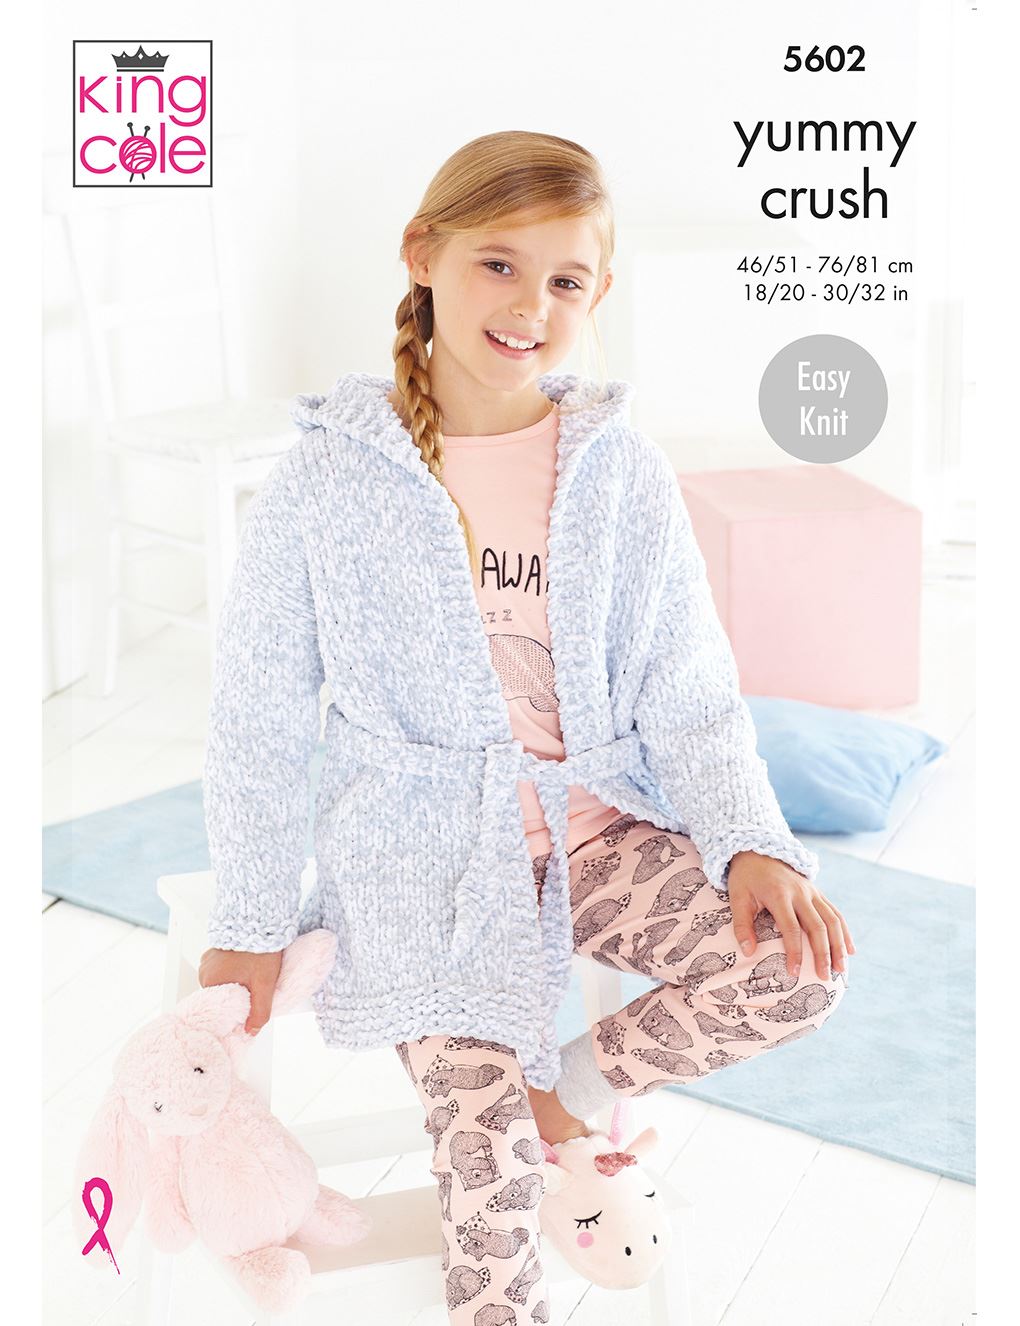 King Cole Yummy Crush knitting pattern (5602) dressing gowns